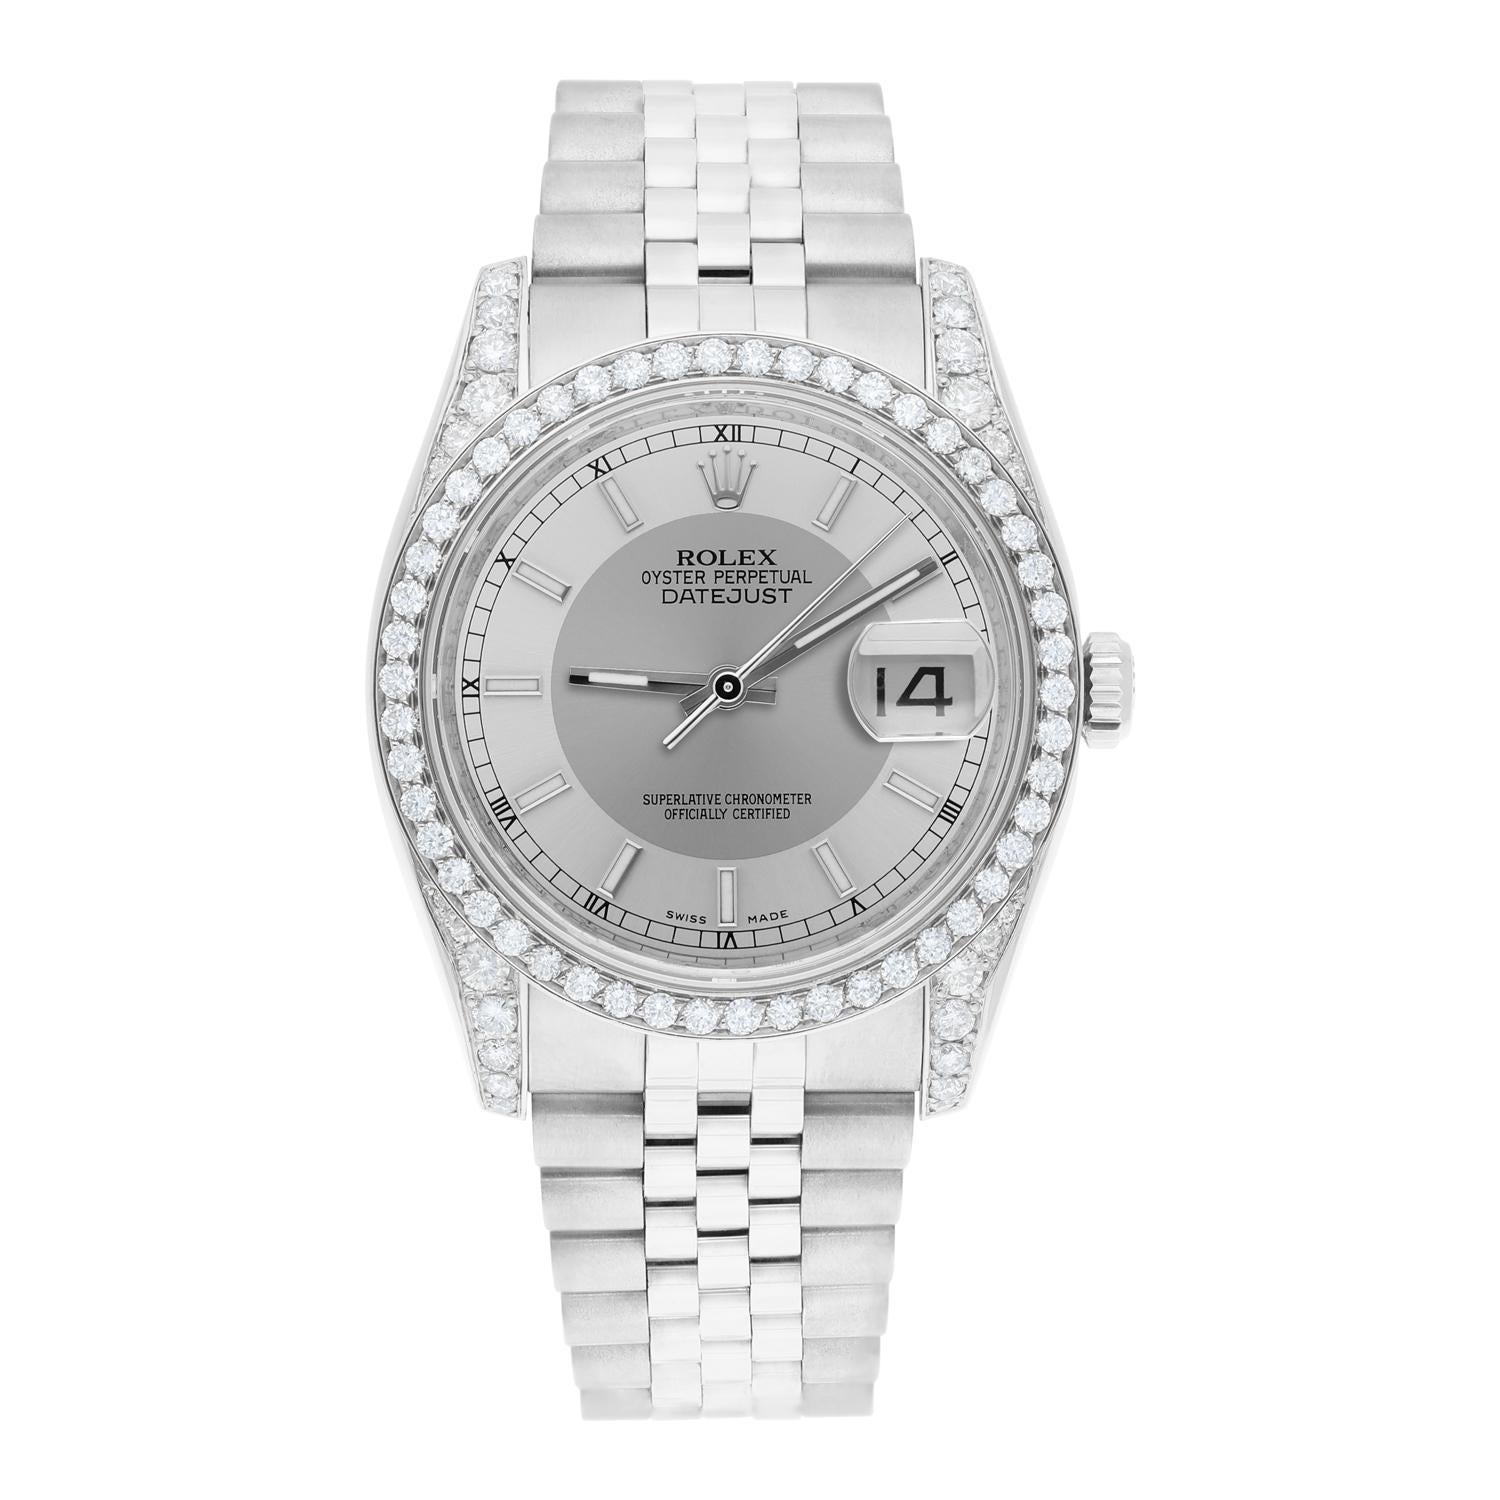 Brand: Rolex
Series: Datejust 
Model: 116234
Case Diameter: 36 mm
Bracelet: Jubilee band; stainless steel
Bezel. and Lugs: Custom Diamond Set
Dial: Silver Tuxedo
Carat Weight: 2.30 carats in total diamond weight
The sale includes a Rolex box and an